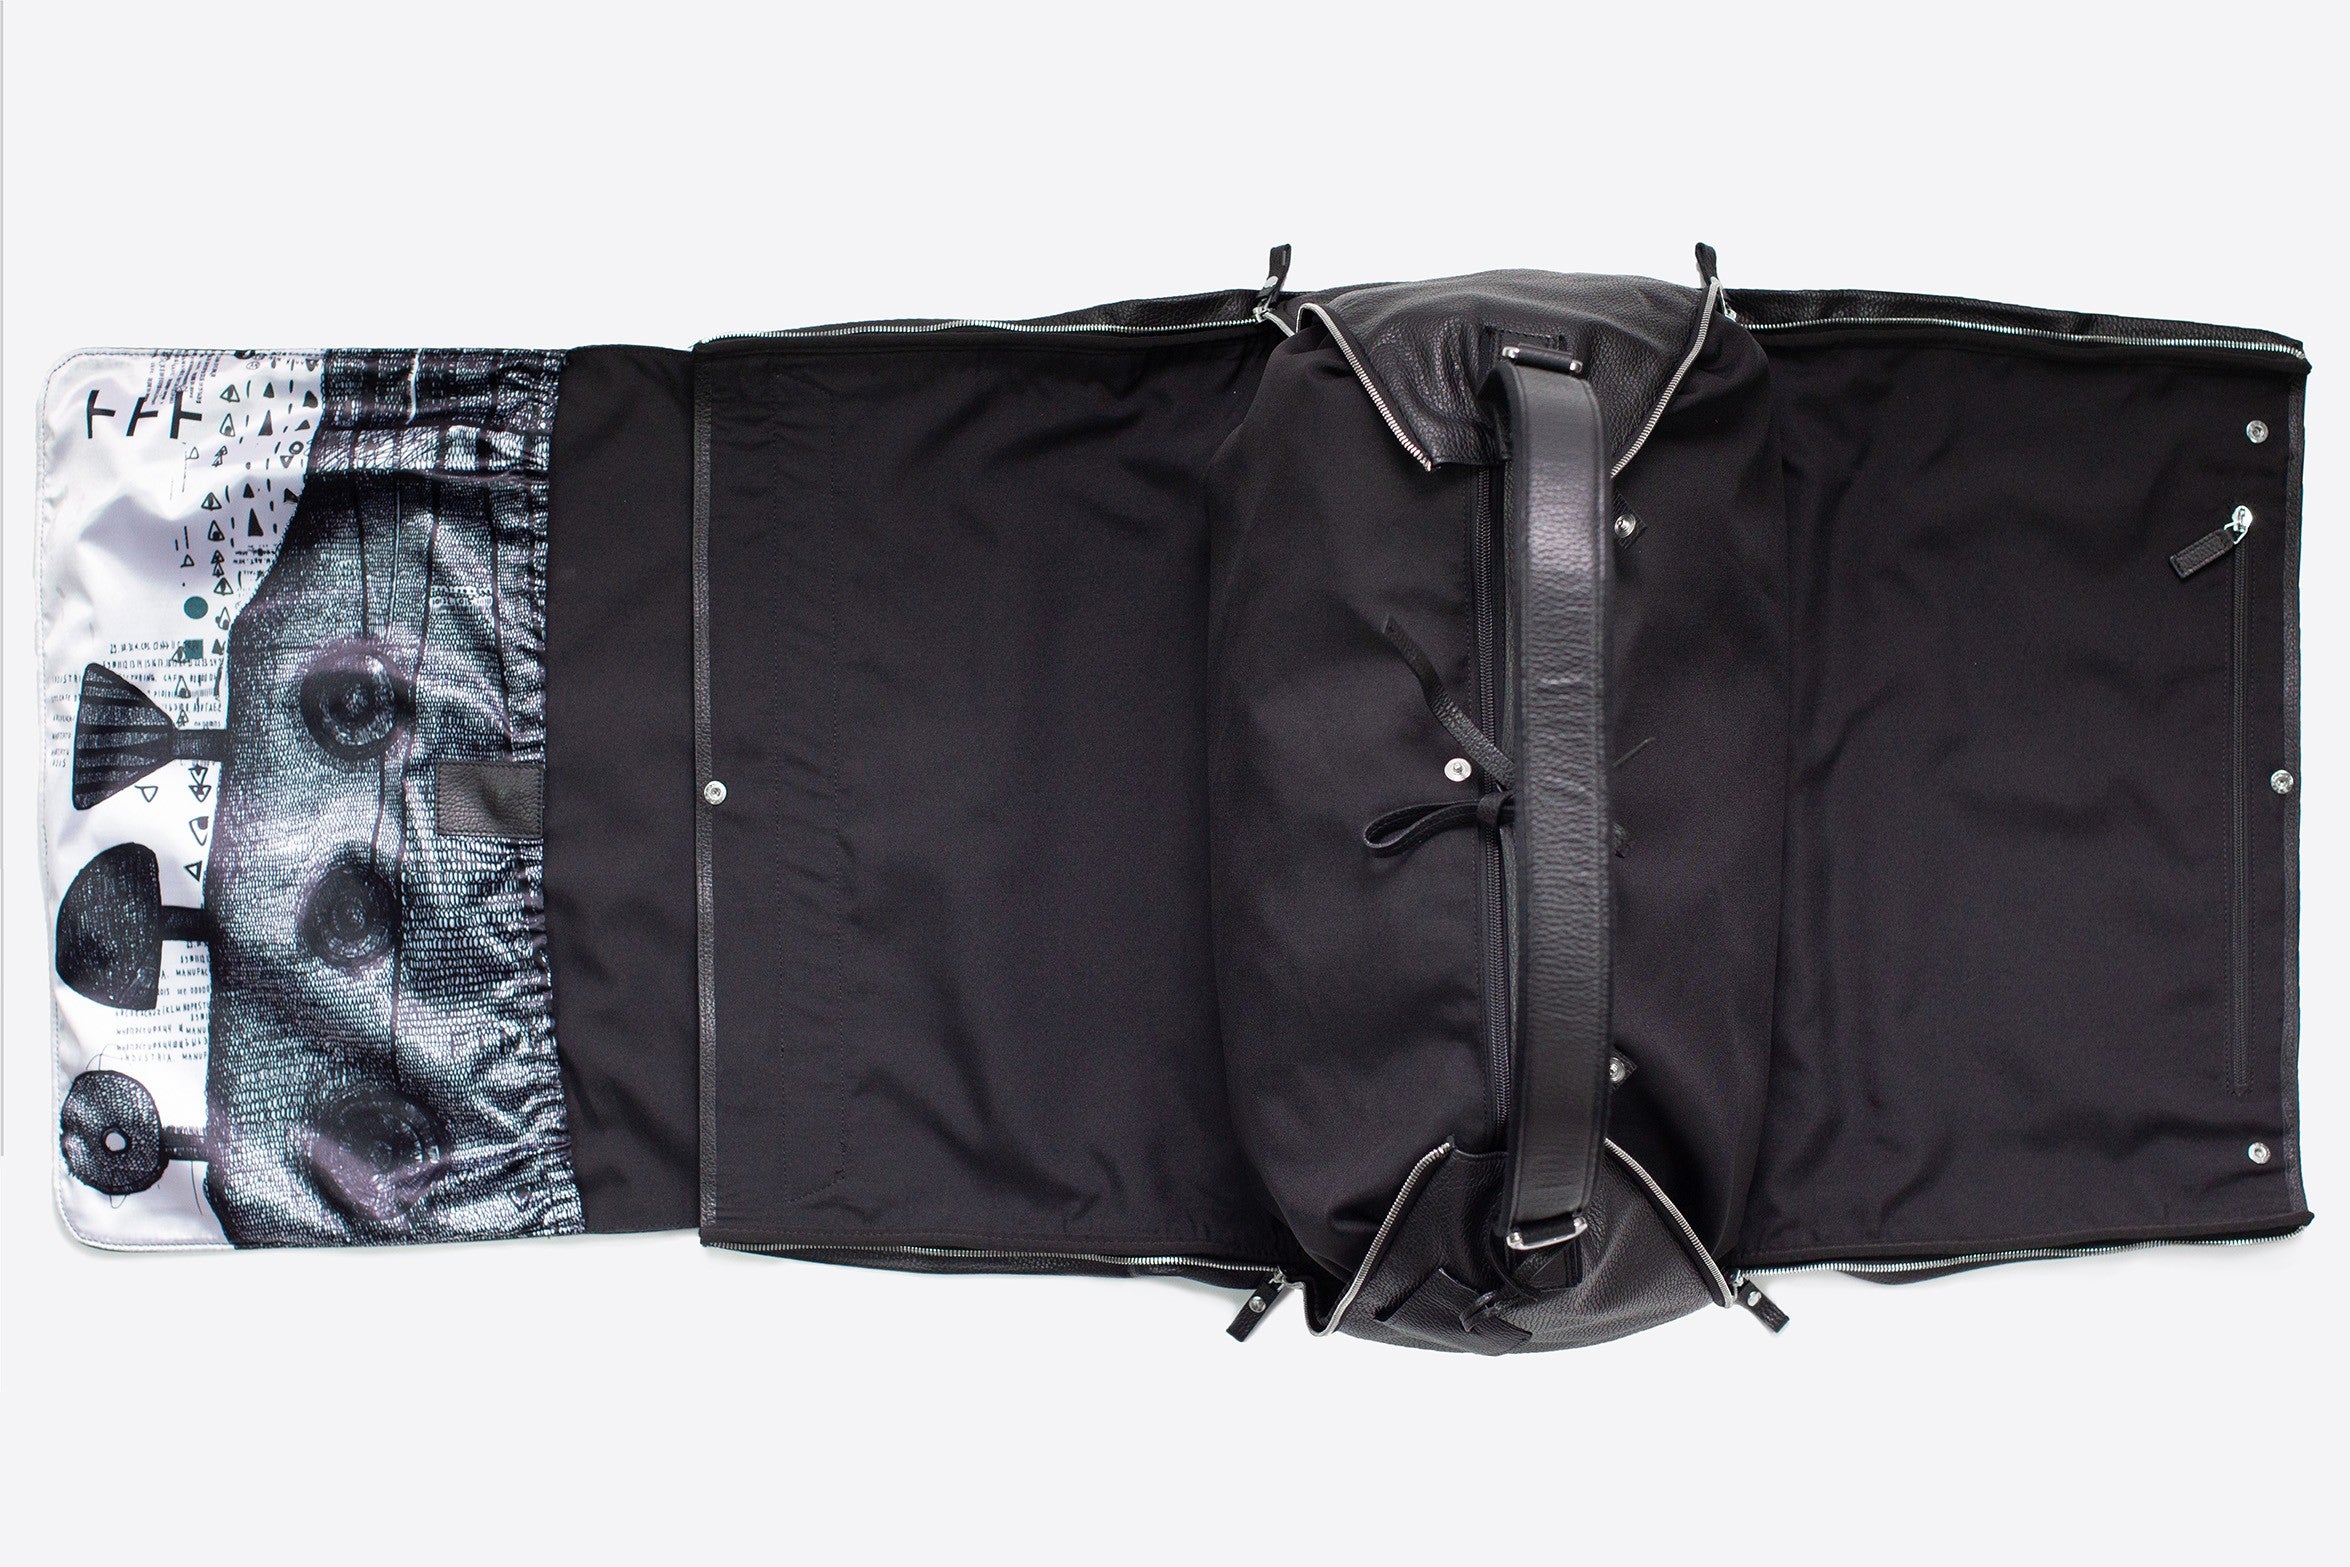 Carry-on Garment Bag - Patented System MB8®